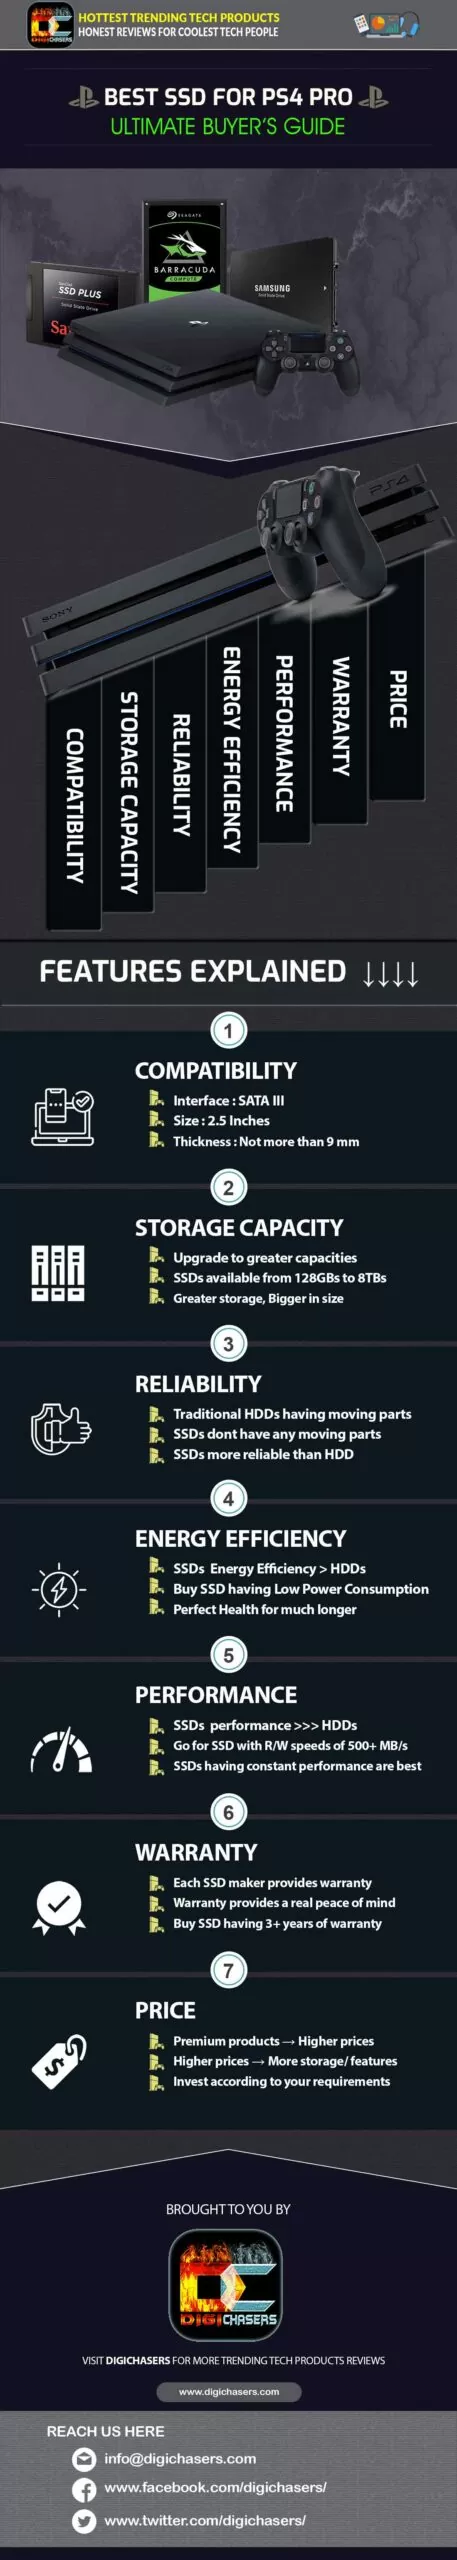 best ssd for ps4 pro infographic